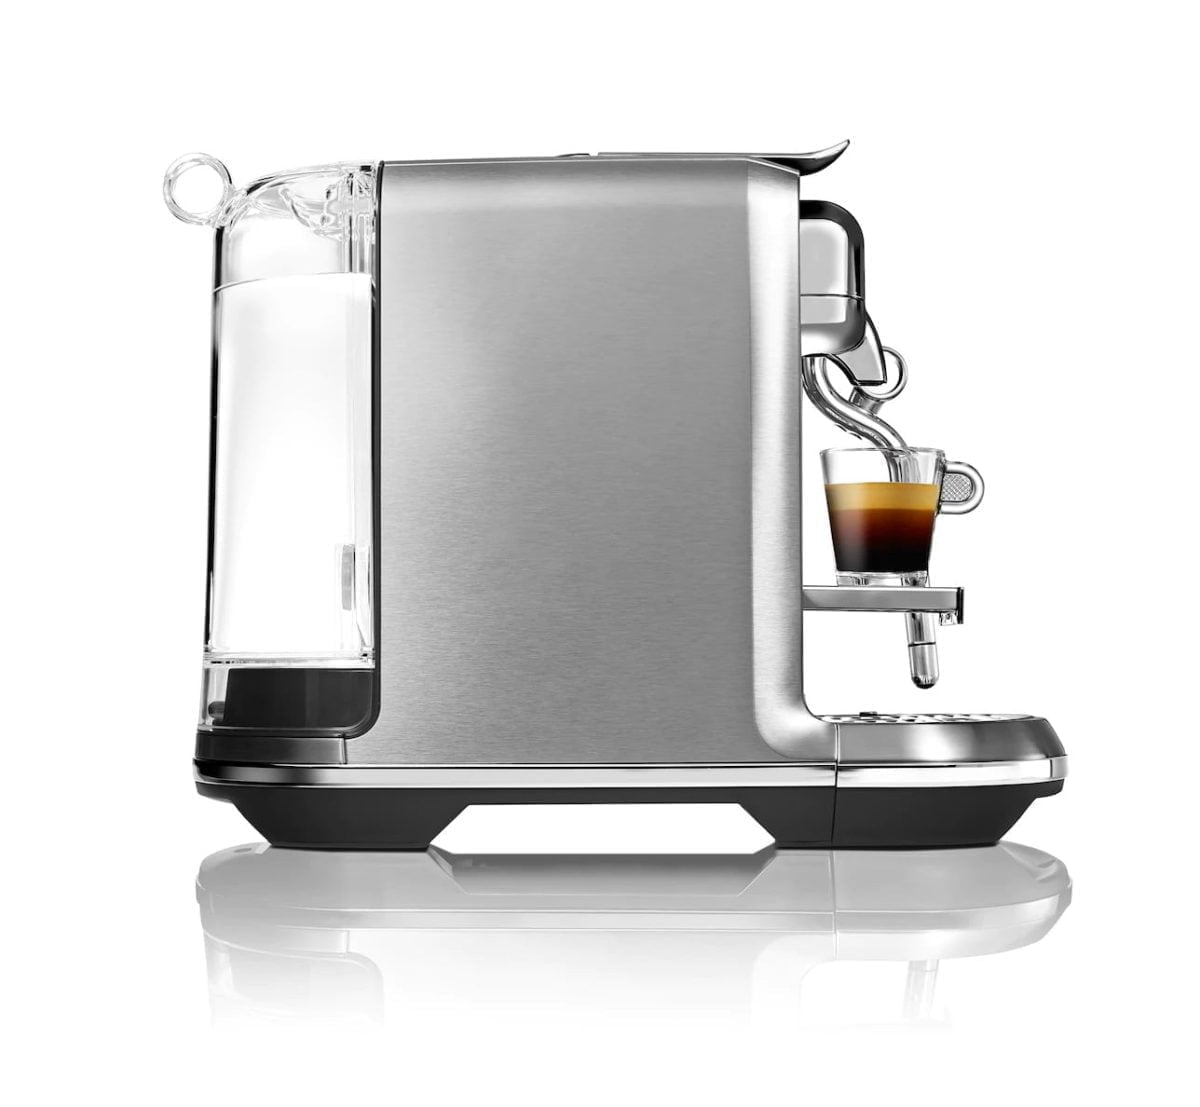 M 0428 Pdp Background Side Nespresso &Lt;H1&Gt;Nespresso By Sage Creatista Plus Pod Coffee Machine - Steel&Lt;/H1&Gt; Https://Www.youtube.com/Watch?V=0Qmamxmrnhu The Nespresso Creatista Plus Gives You The Ability To Easily Create Personalized Café-Style Quality Coffee At Home. With A Stylish Sleek Design And Stainless Steel Finish, The Creatista Plus Has A 3 Second Heat Up Time, 8 Texture Levels And 11 Milk Temperature Settings. Each Machine Includes A Stainless Steel Milk Jug. Available Settings: 3 Coffee Volume Settings (From 25 To 150 Ml), 8 Milk Texture/Froth Settings (From 2 To 30 Mm) And 9 Milk Temperature Settings (From 55 To 75C). Comes With A 480Ml Stainless Steel Milk Jug, Pop Out Cup Support, Removable Drip Grid And Removable Drip Tray. &Lt;Ul&Gt; &Lt;Li&Gt;Coffee Options Include: Espresso, Cappuccino, Latte, Ristretto, Lungo, And Latte Macchiato.&Lt;/Li&Gt; &Lt;Li&Gt;Compatible With Nespresso Original Capsules.&Lt;/Li&Gt; &Lt;Li&Gt;Recyclable Pods.&Lt;/Li&Gt; &Lt;Li&Gt;Strength Selector - To Tailor The Strength Of The Coffee To Your Taste.&Lt;/Li&Gt; &Lt;Li&Gt;Milk Frother Included.&Lt;/Li&Gt; &Lt;Li&Gt;Incorporated Crema Device.&Lt;/Li&Gt; &Lt;Li&Gt;19 Bar Pump Pressure.&Lt;/Li&Gt; &Lt;Li&Gt;Water Capacity 1.5 Litres.&Lt;/Li&Gt; &Lt;Li&Gt;Water Level Gauge.&Lt;/Li&Gt; &Lt;Li&Gt;Transparent Removable Water Tank.&Lt;/Li&Gt; &Lt;Li&Gt;Adjustable Cup Stand For Any Size Mug.&Lt;/Li&Gt; &Lt;Li&Gt;Removable Drip Tray.&Lt;/Li&Gt; &Lt;Li&Gt;Magnetic Pod Holder.&Lt;/Li&Gt; &Lt;Li&Gt;Auto Shut-Off After 20 Minutes.&Lt;/Li&Gt; &Lt;Li&Gt;Descale Warning Feature.&Lt;/Li&Gt; &Lt;Li&Gt;Dishwasher Safe Parts For Effortless Cleaning.&Lt;/Li&Gt; &Lt;/Ul&Gt; With 14 Capsules Nespresso Nespresso By Sage Creatista Plus Pod Coffee Machine - Steel (With 14 Capsules)